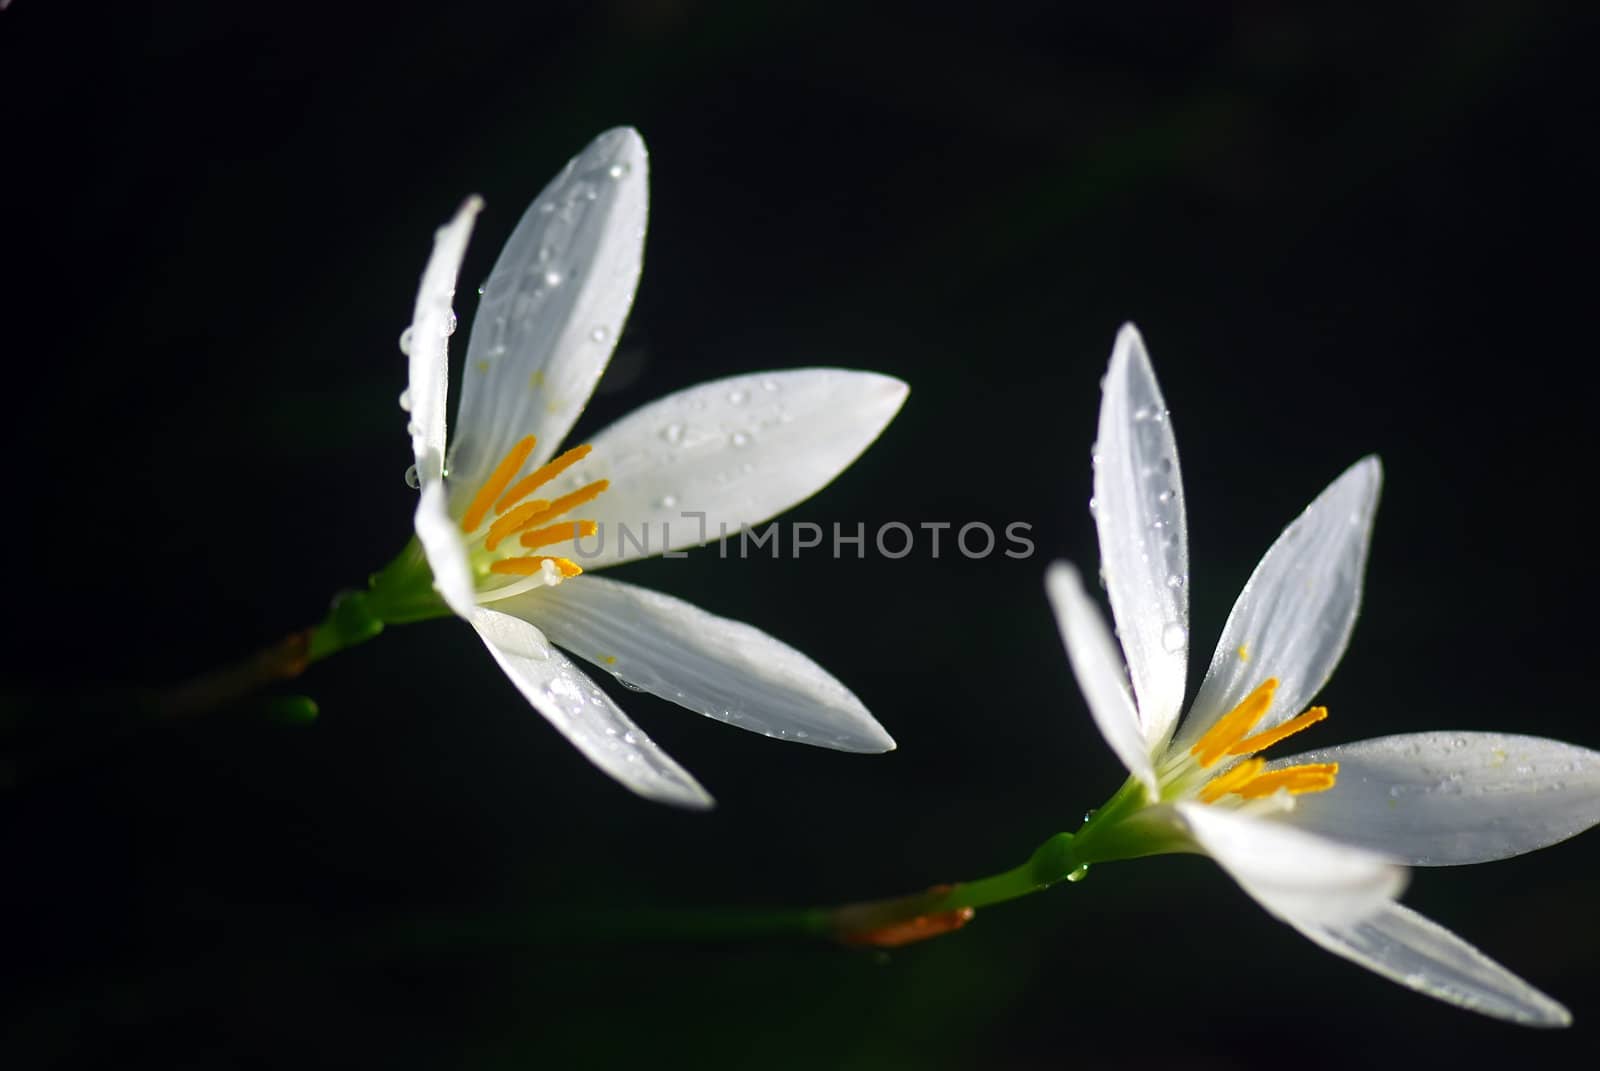 She's Scientific name is called Zephyranthes grandiflora